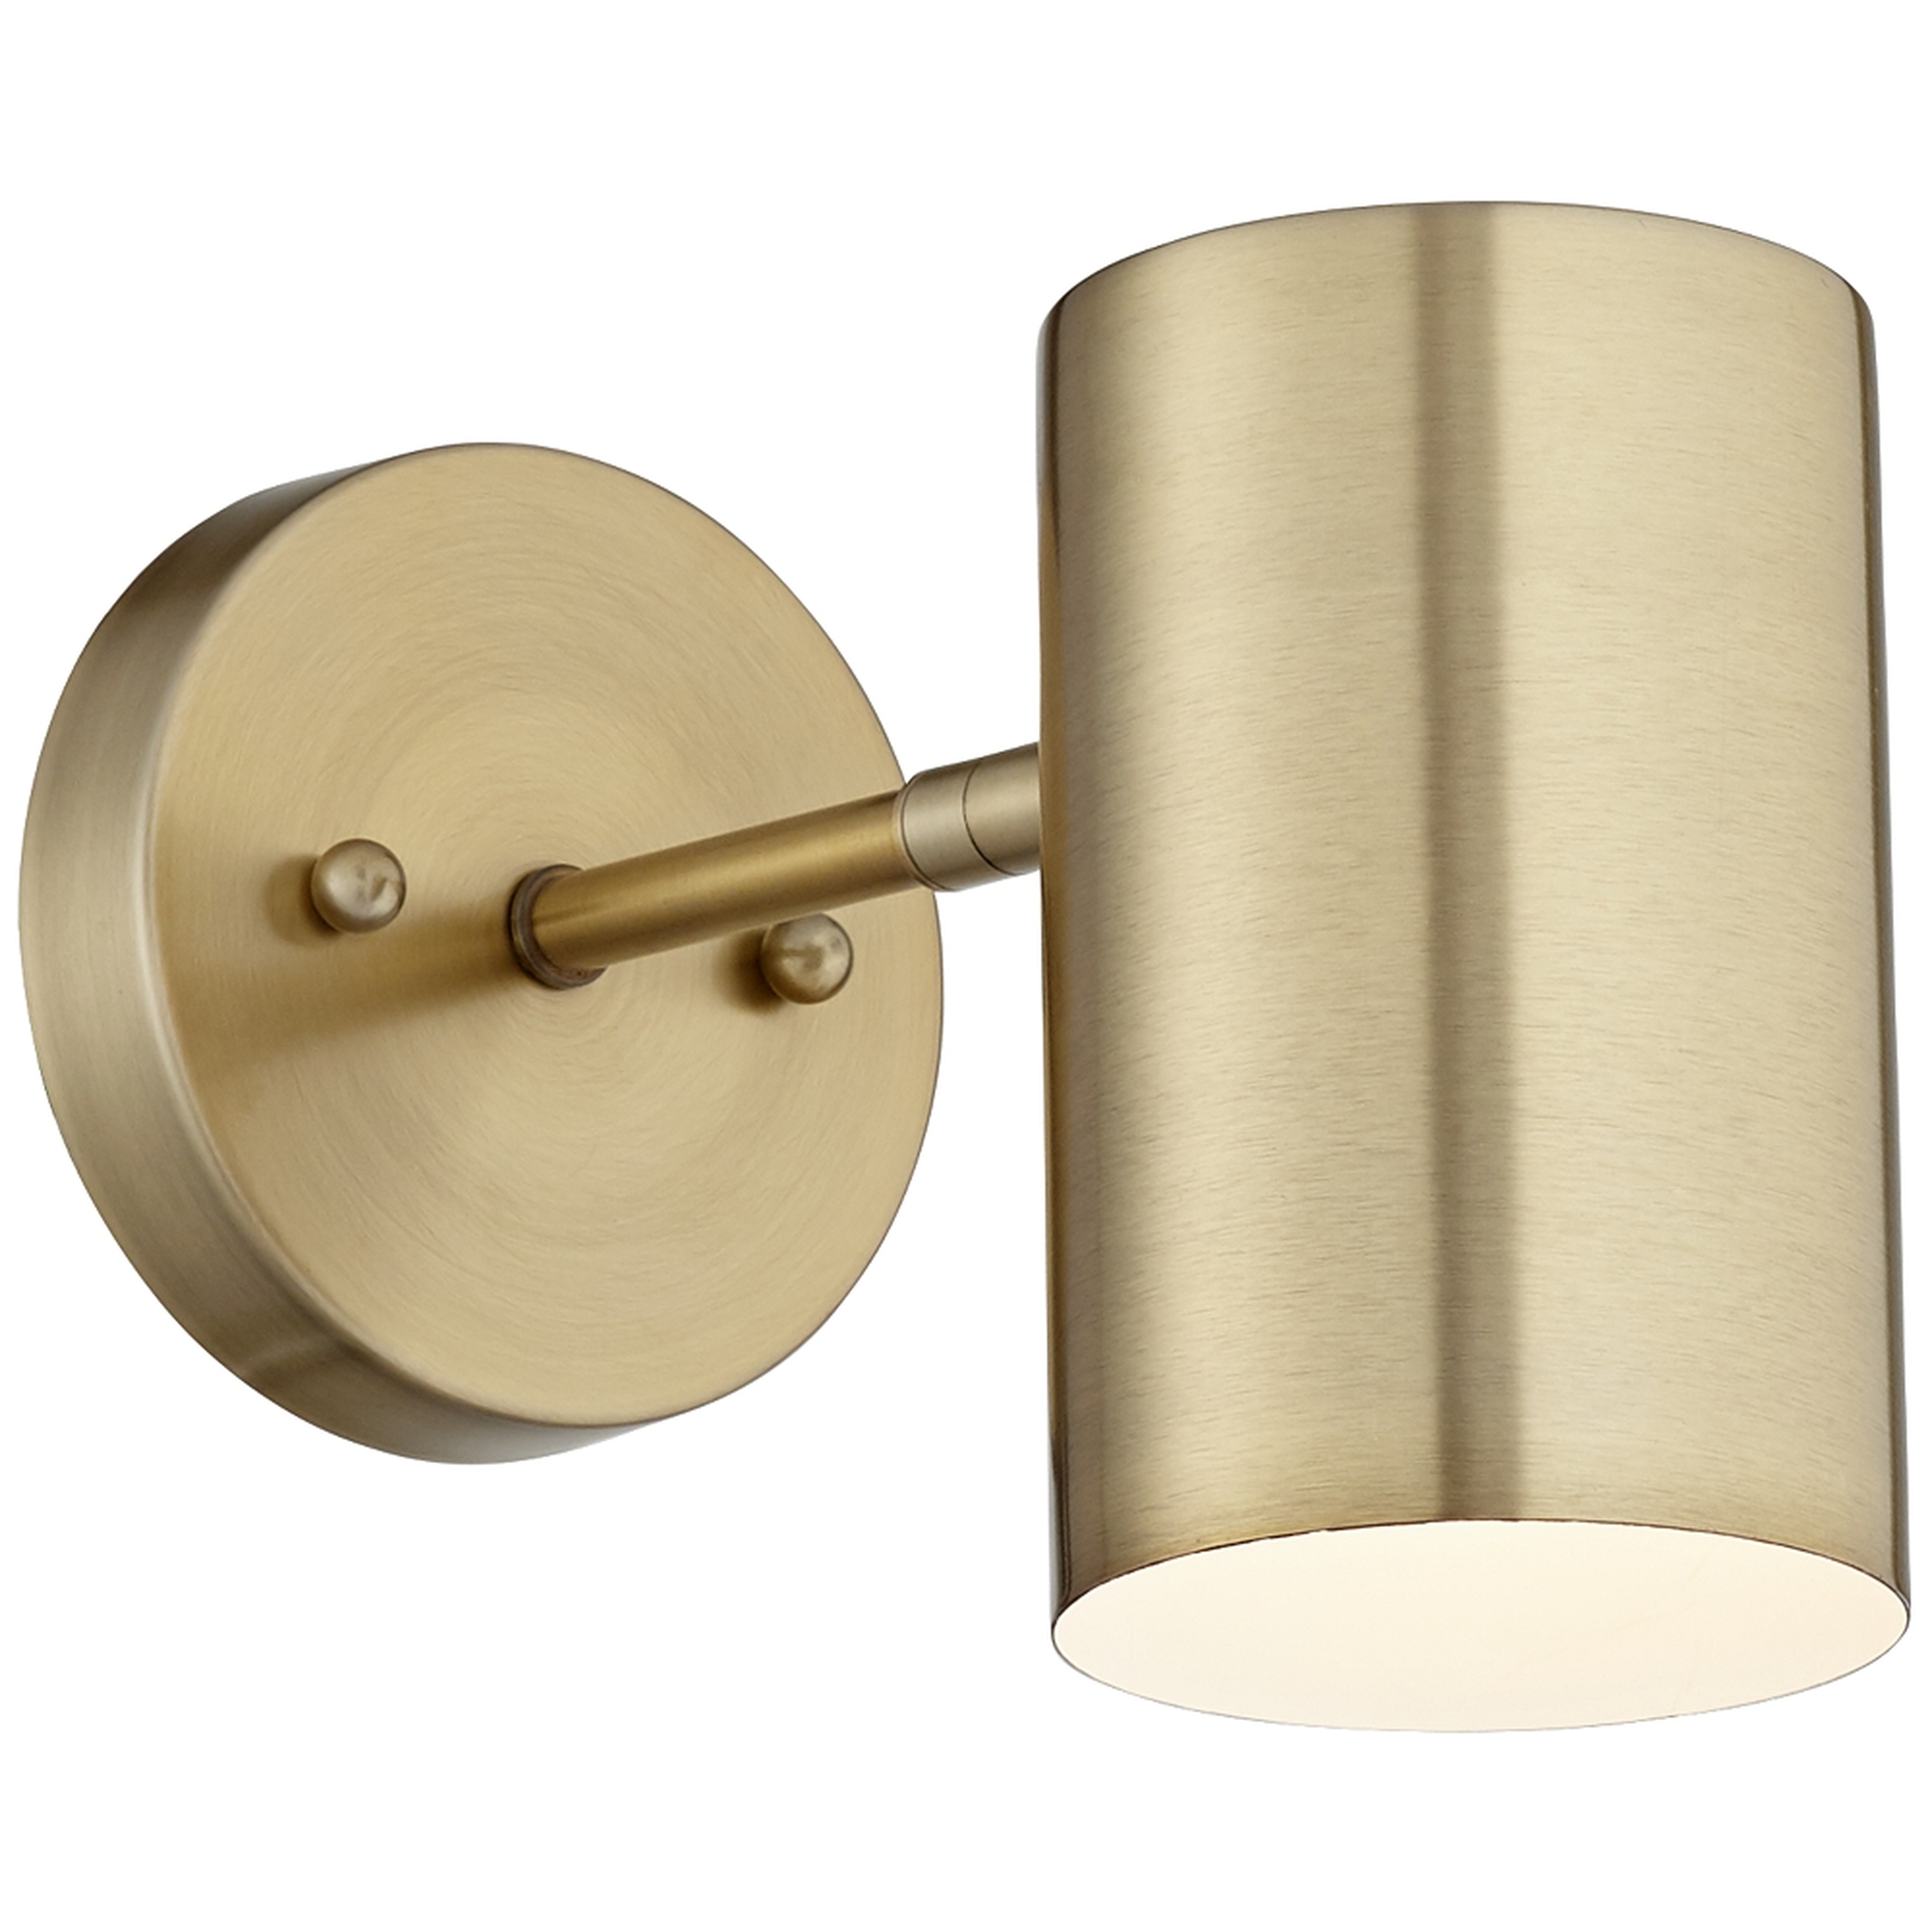 Carla Polished Brass Down-Light Hardwire Wall Lamp - Style # 63T08 - Lamps Plus